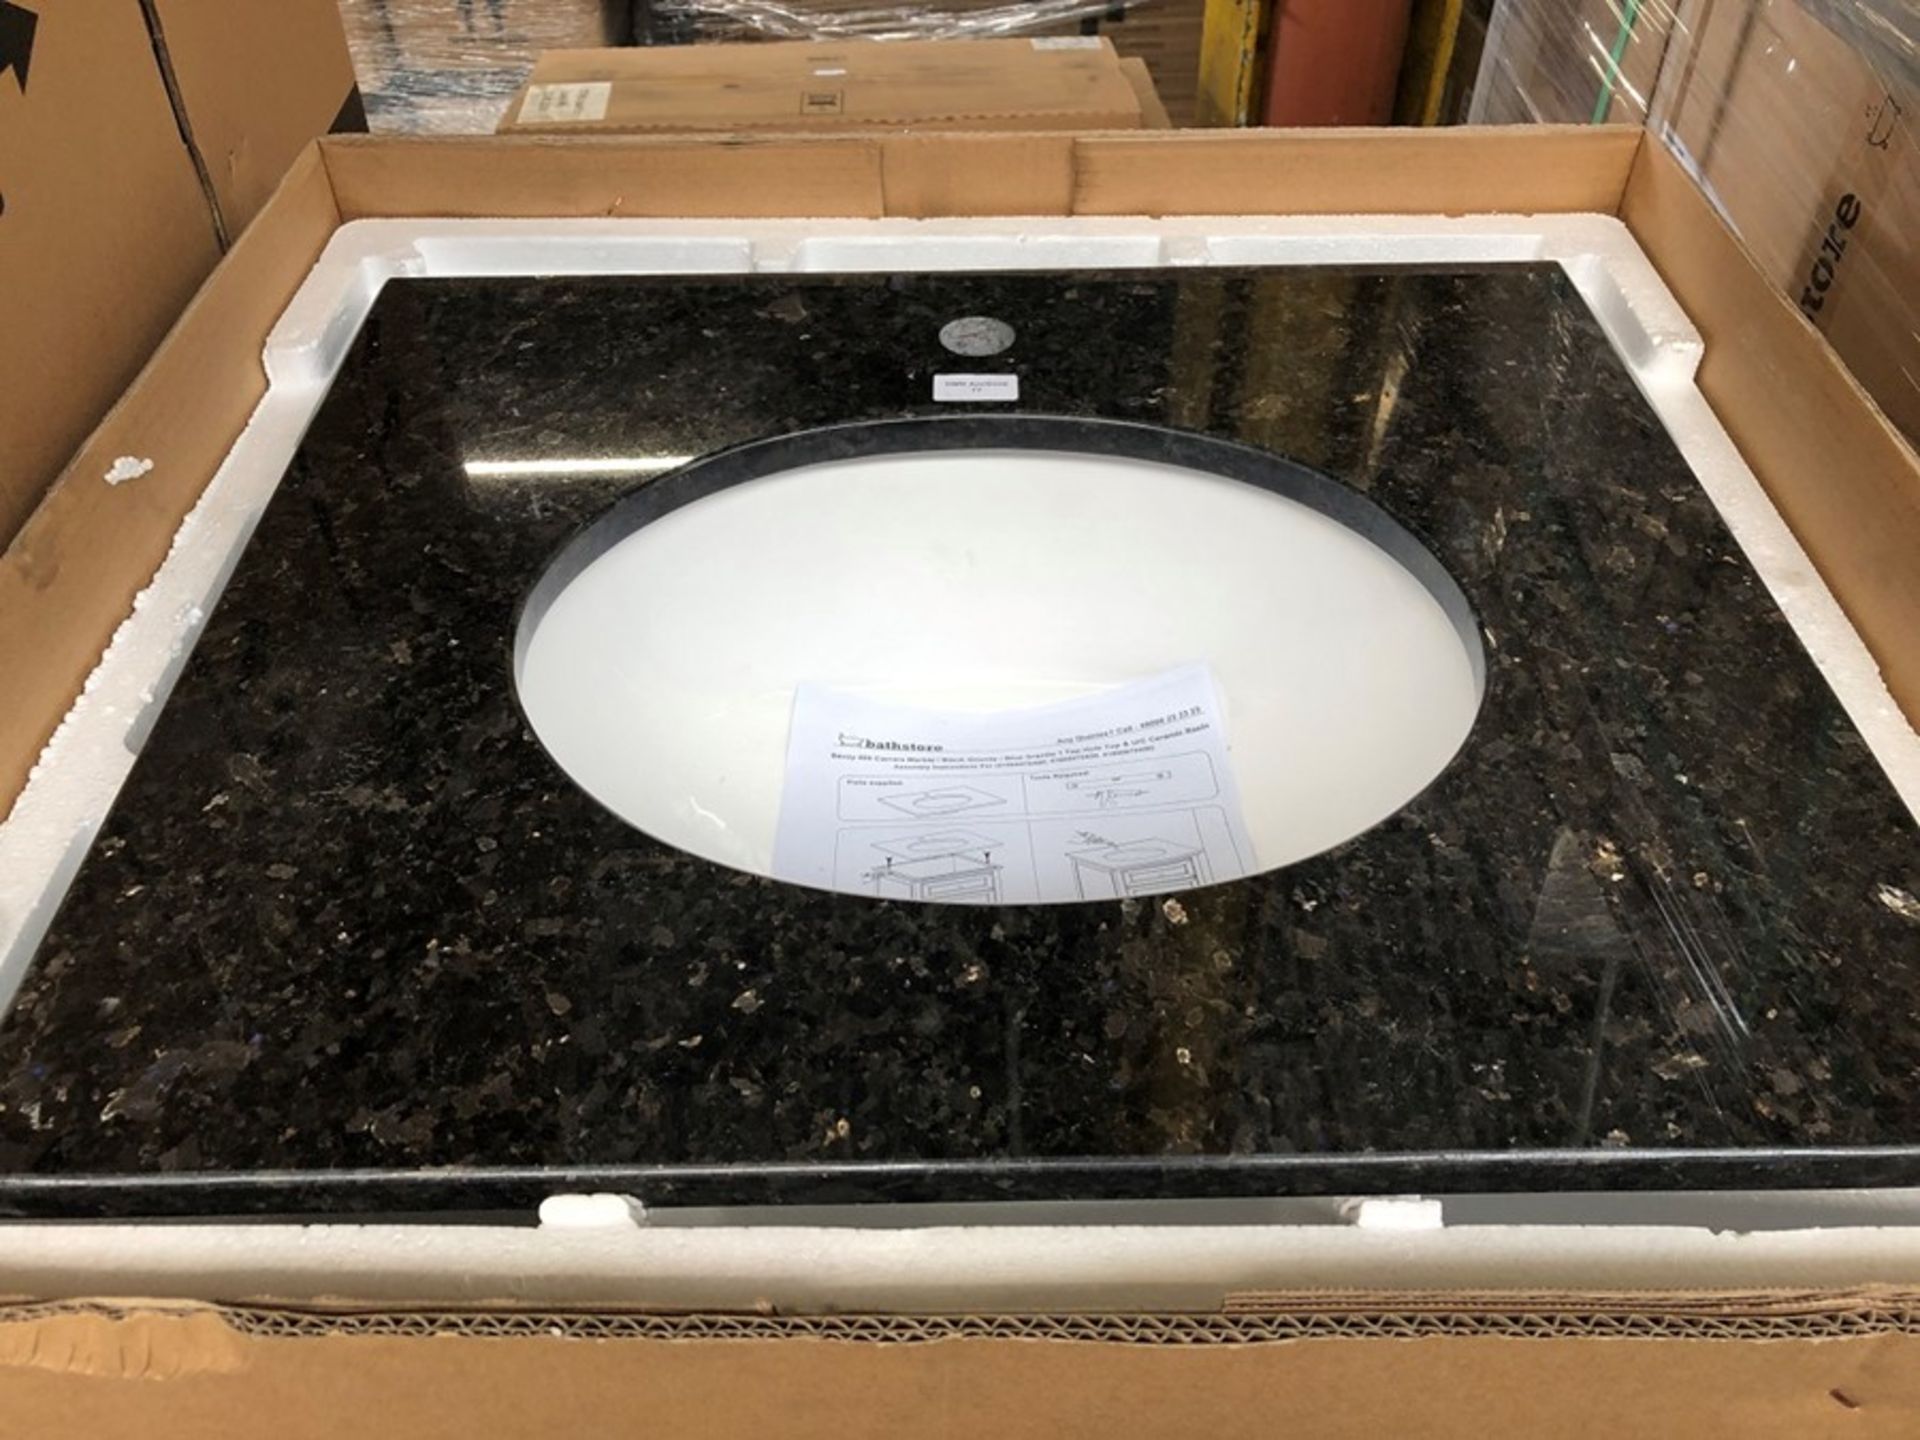 600W x 500D, SOLID GRANITE BLACK & BLUE FLACK WORKTOP WITH CERAMIC UNDERMOUNTED SINK. FACTORY